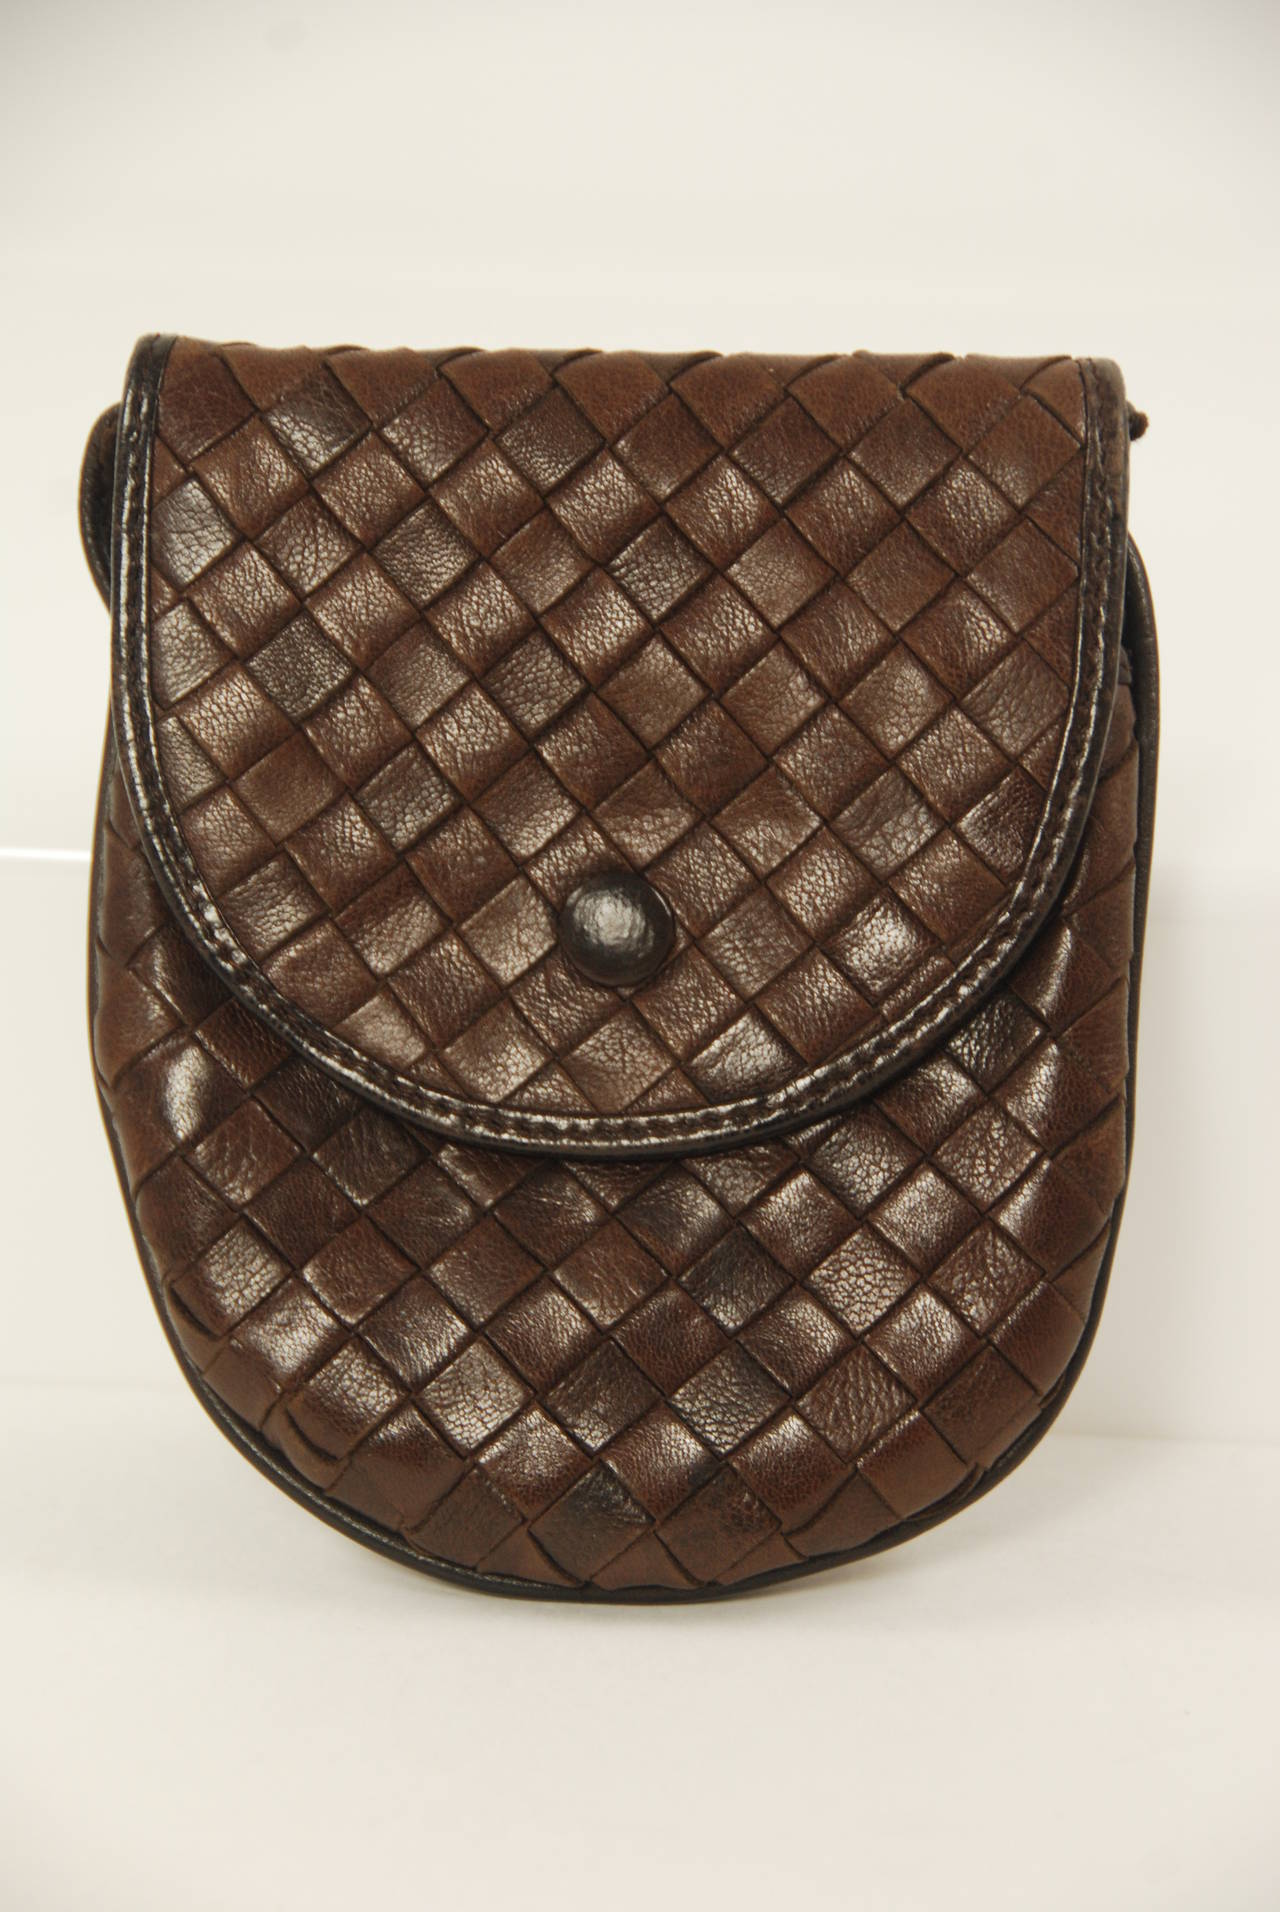 Darling Bottega Veneta brown Intrecciato mini purse or flat pouch, circa 1980s - 1990s. Inside is lined in brown satin. There are two compartments. The shoulder strap has a drop of 22.5